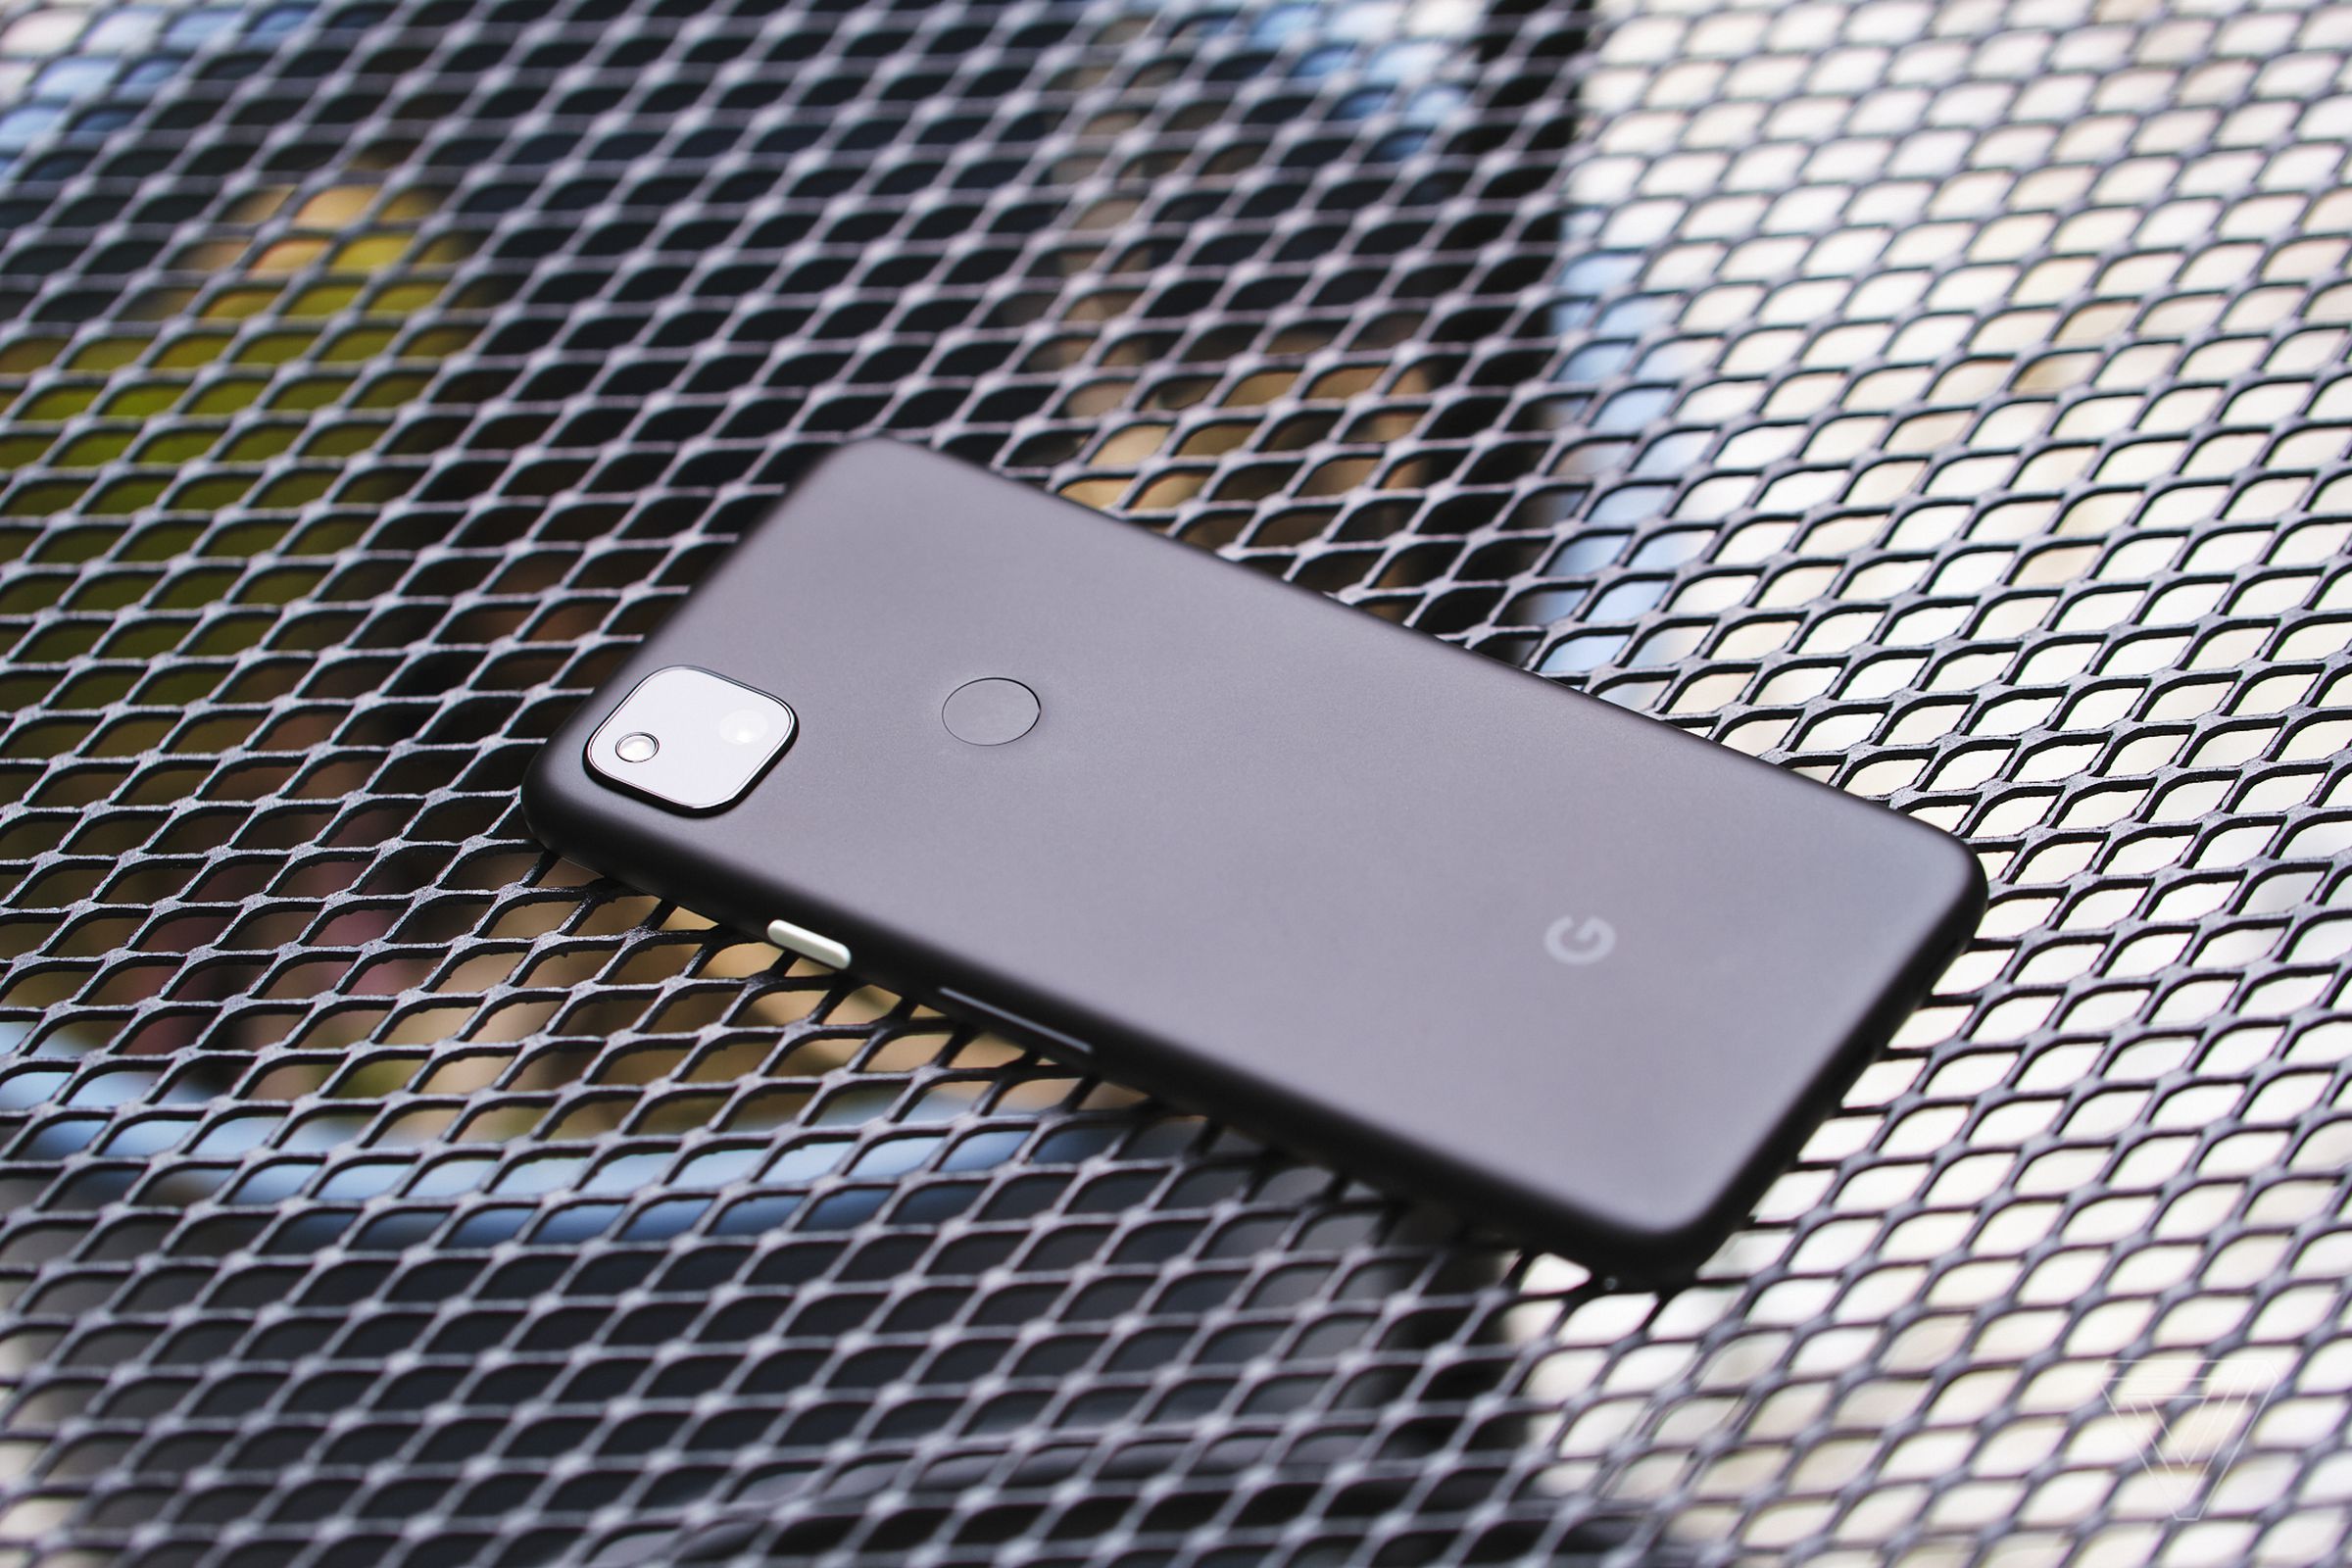 The Google Pixel 4A is made out of plastic.